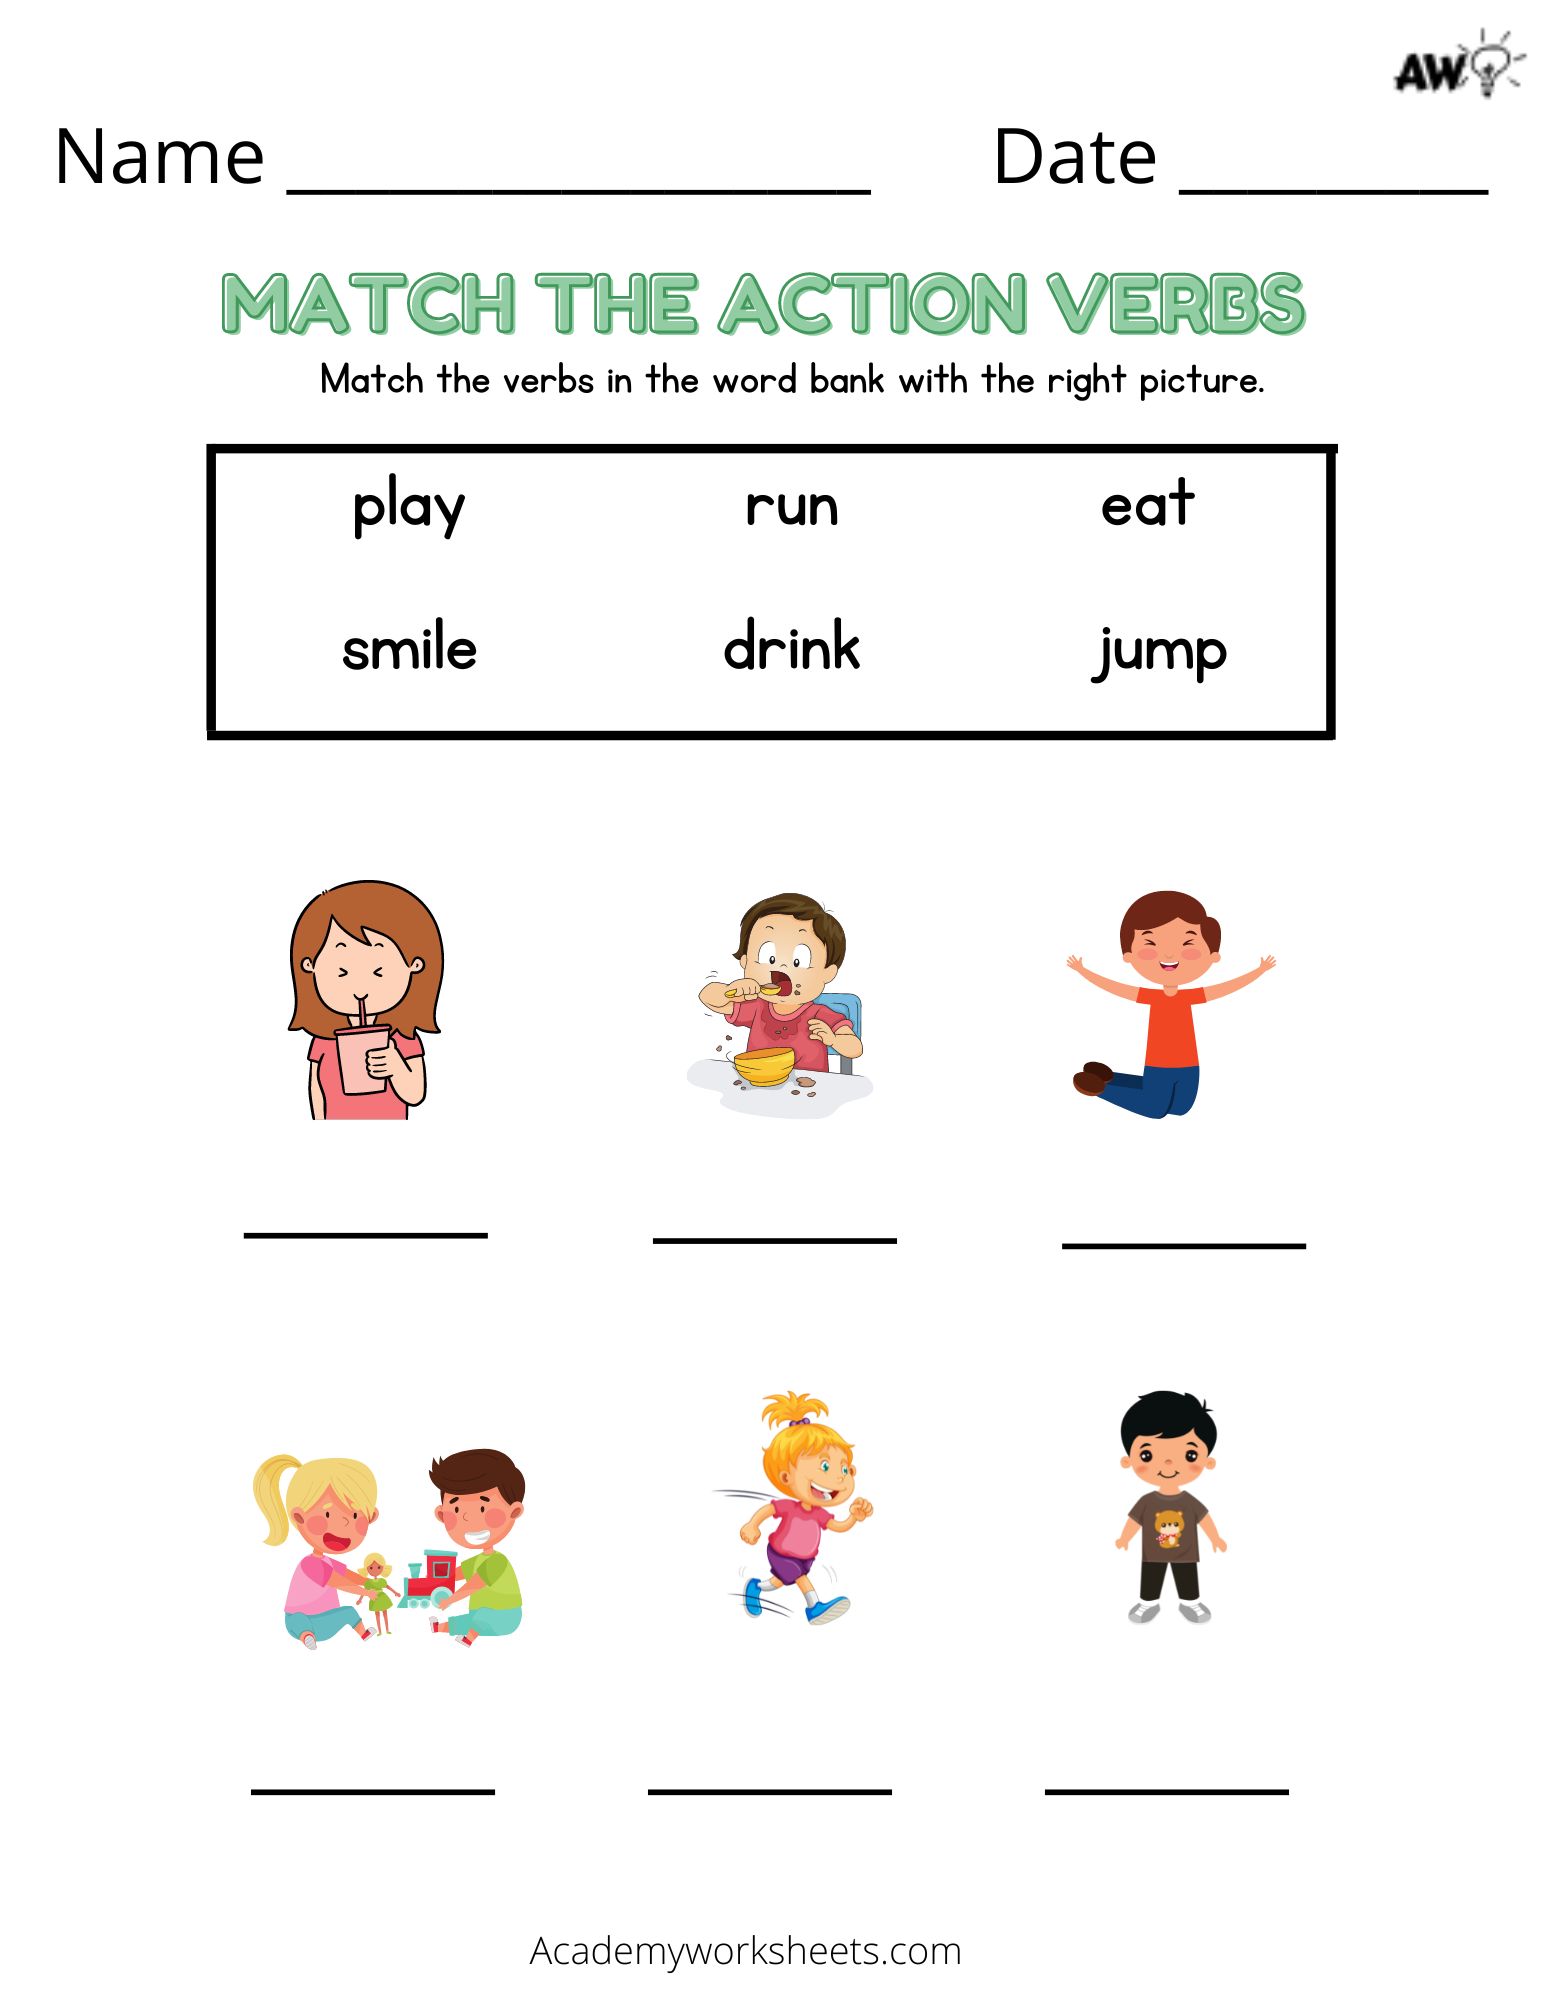 what-s-a-verb-worksheets-academy-worksheets